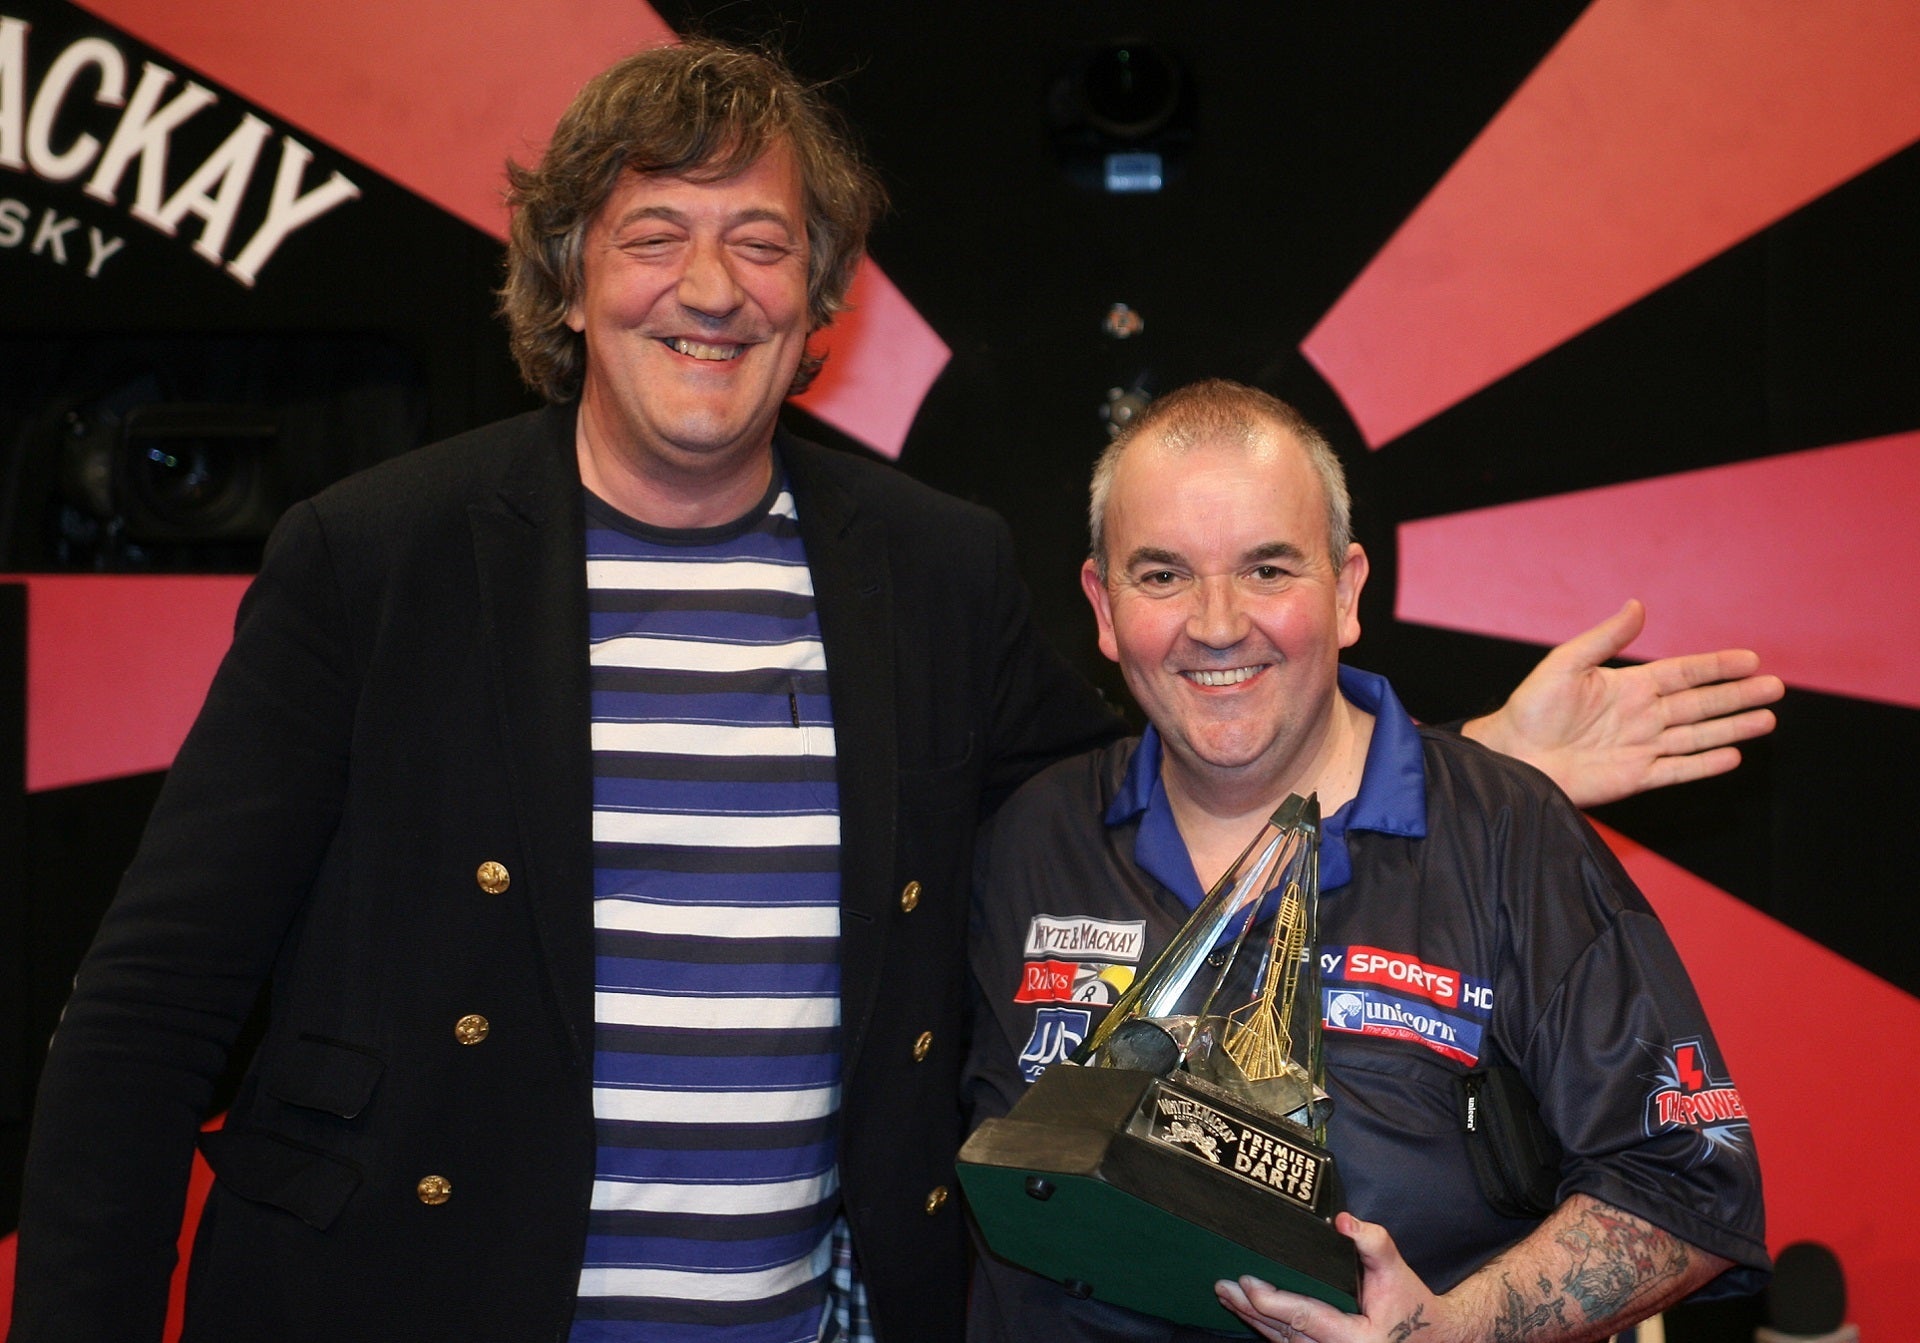 Stephen Fry & Dave Clark support dartboard giveaway campaign